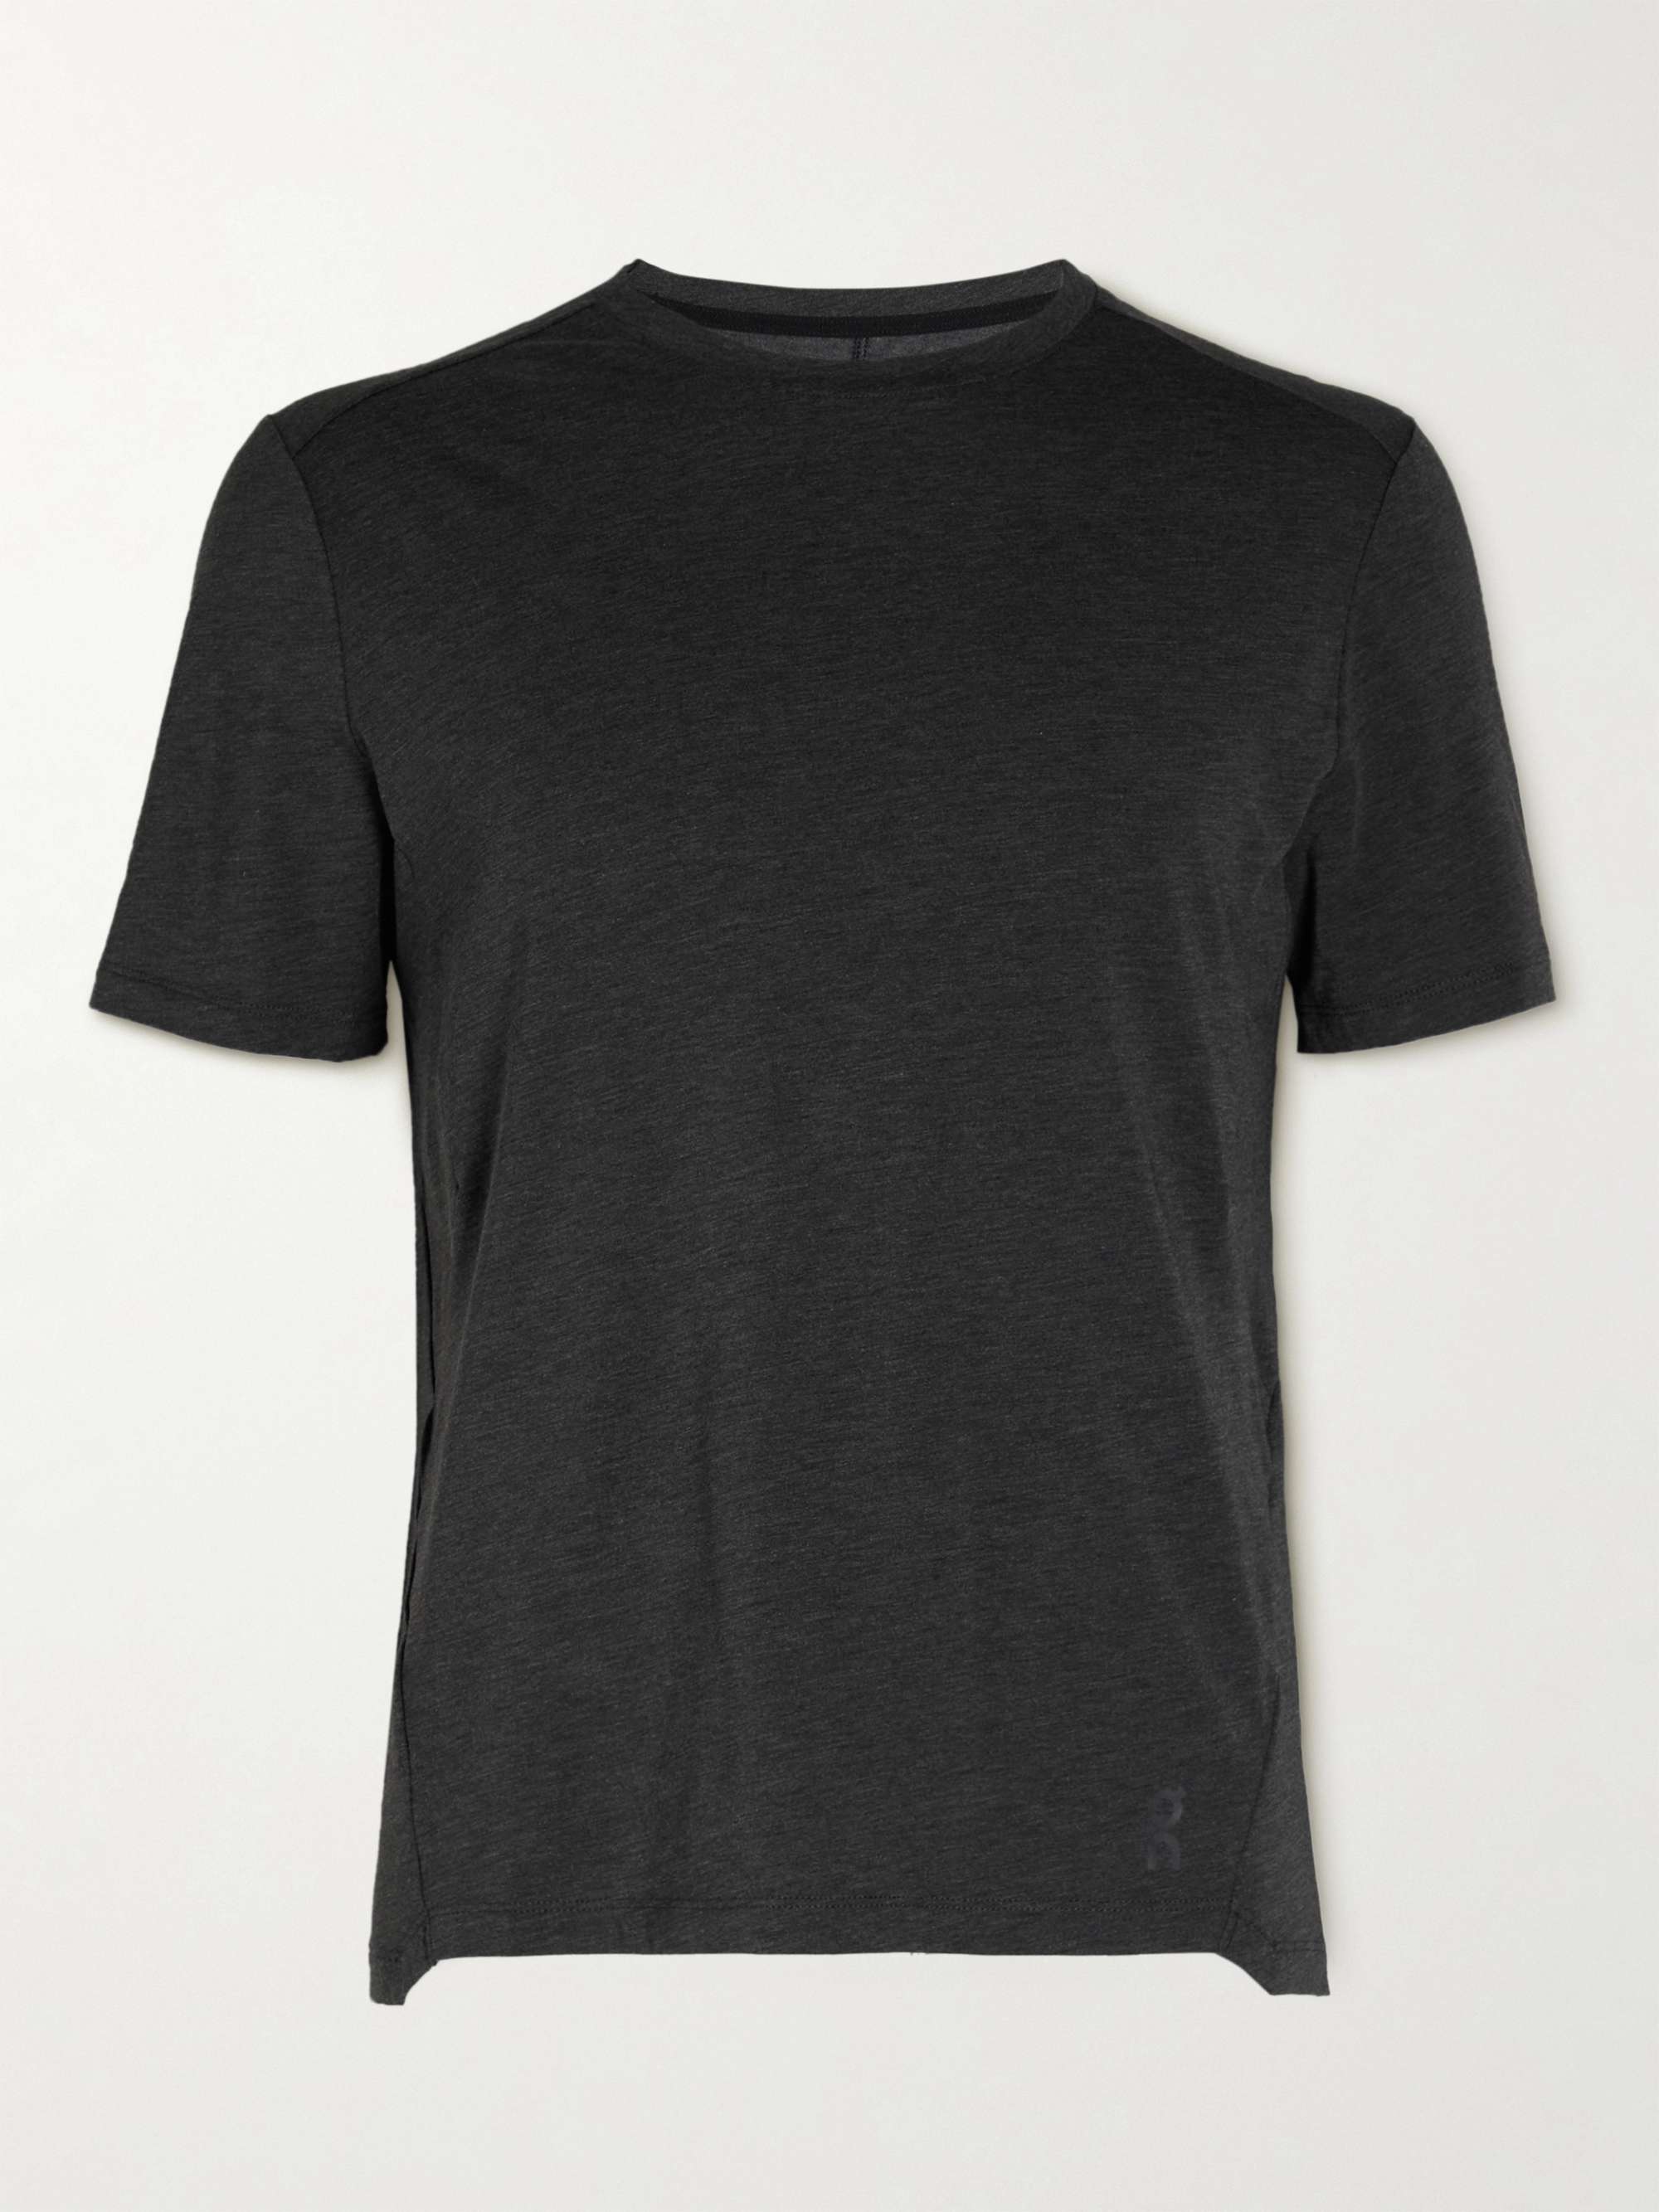 ON Active-T Stretch Cotton-Blend Jersey T-Shirt